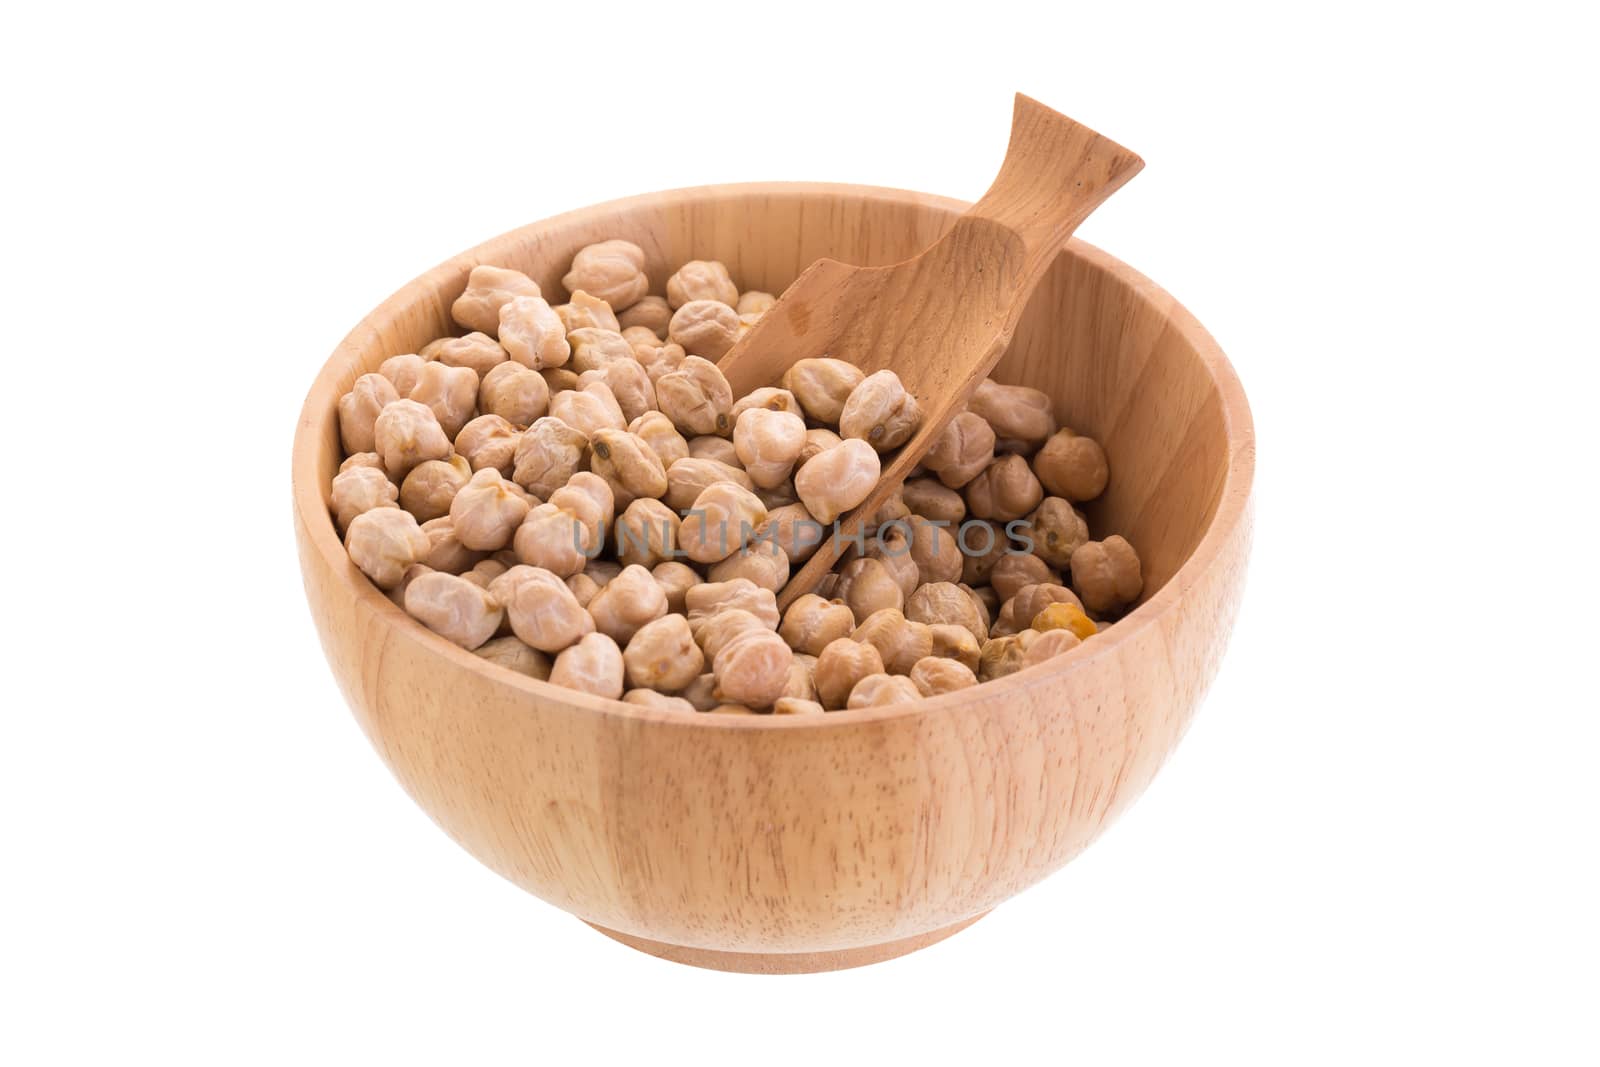 Garbenzo beans on a wooden bowl isolated on a white background by kaiskynet